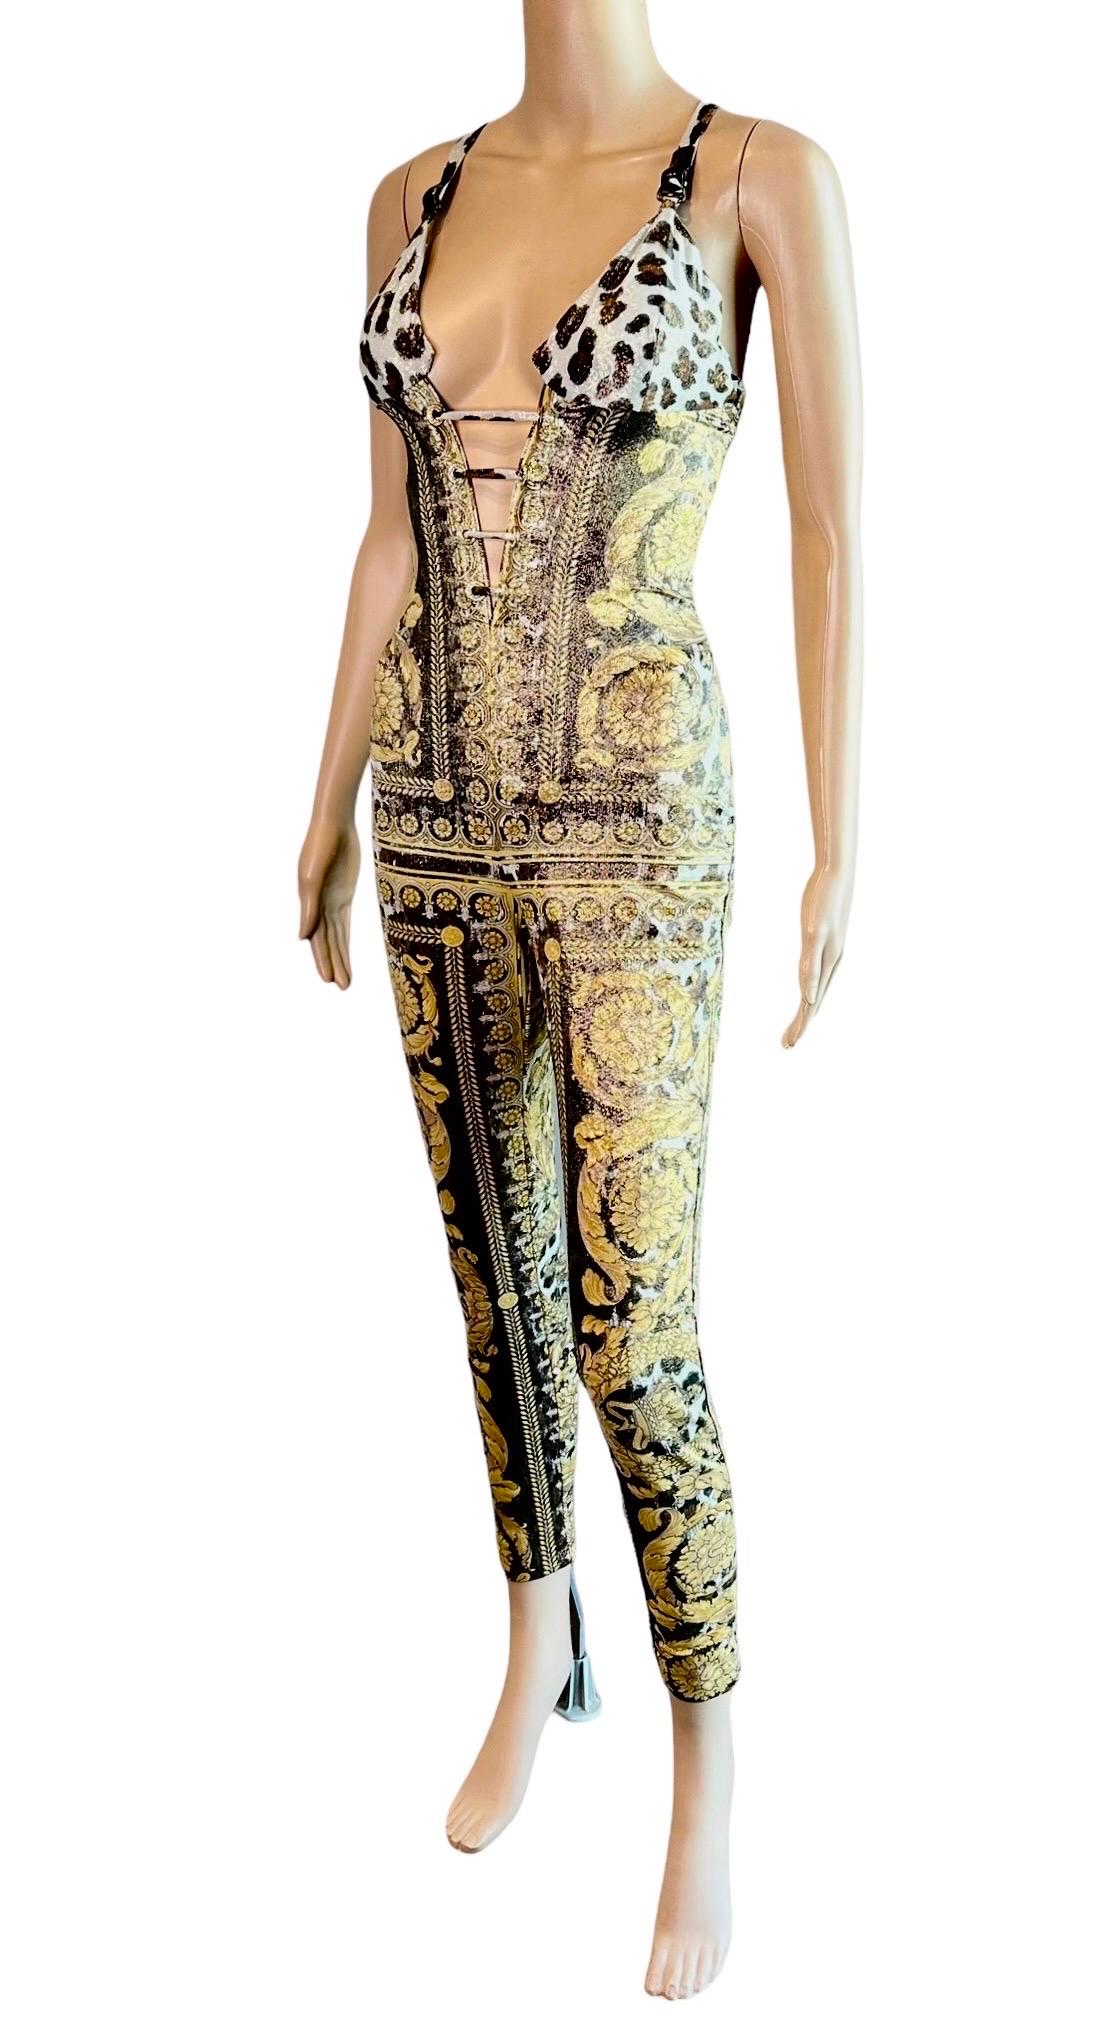 Gianni Versace S/S 1992 Runway Vintage Bustier Embellished Baroque Catsuit Jumpsuit IT 42

Gianni Versace Couture jumpsuit featuring plunging bustier neckline, cutout open back, lace up front and back held by ribbons connected to crystal embellished